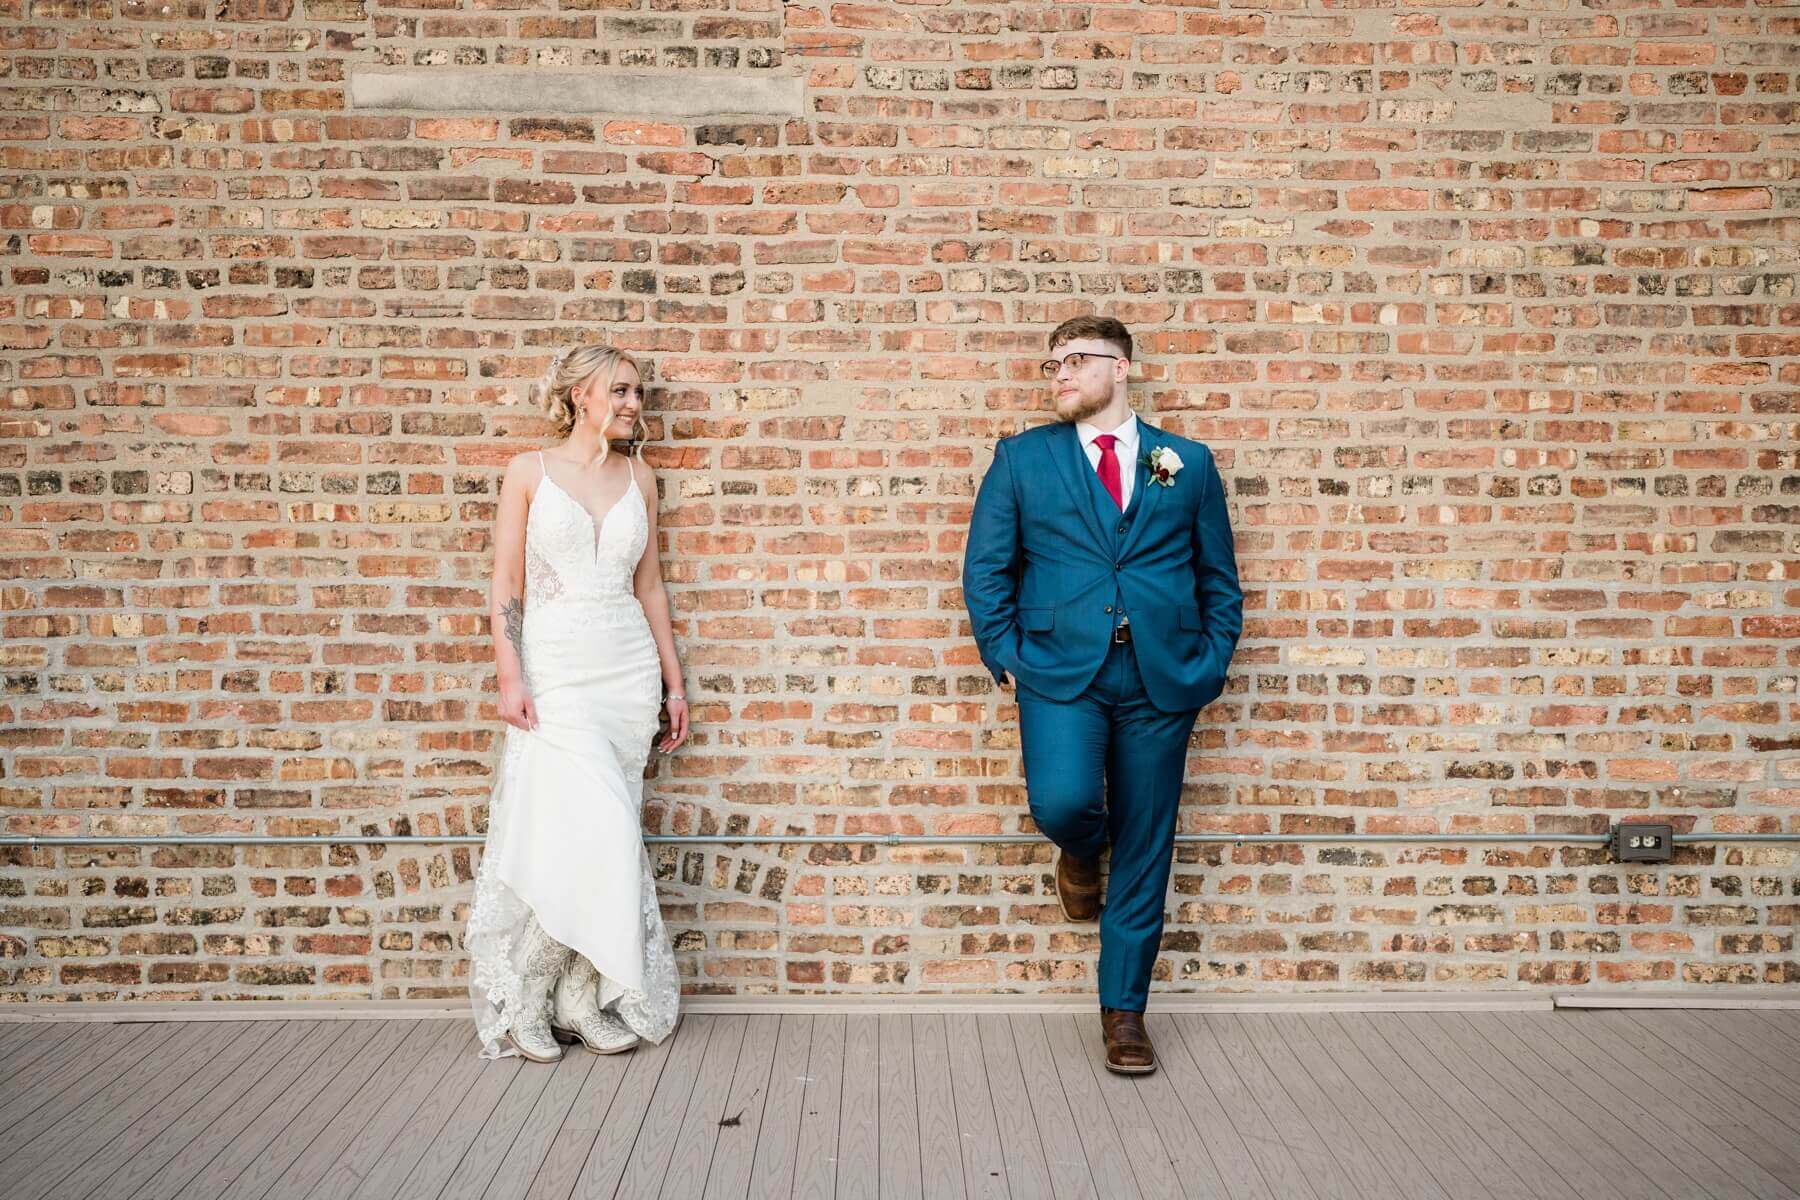 Bride and groom leaning against brick wall and looking at each other